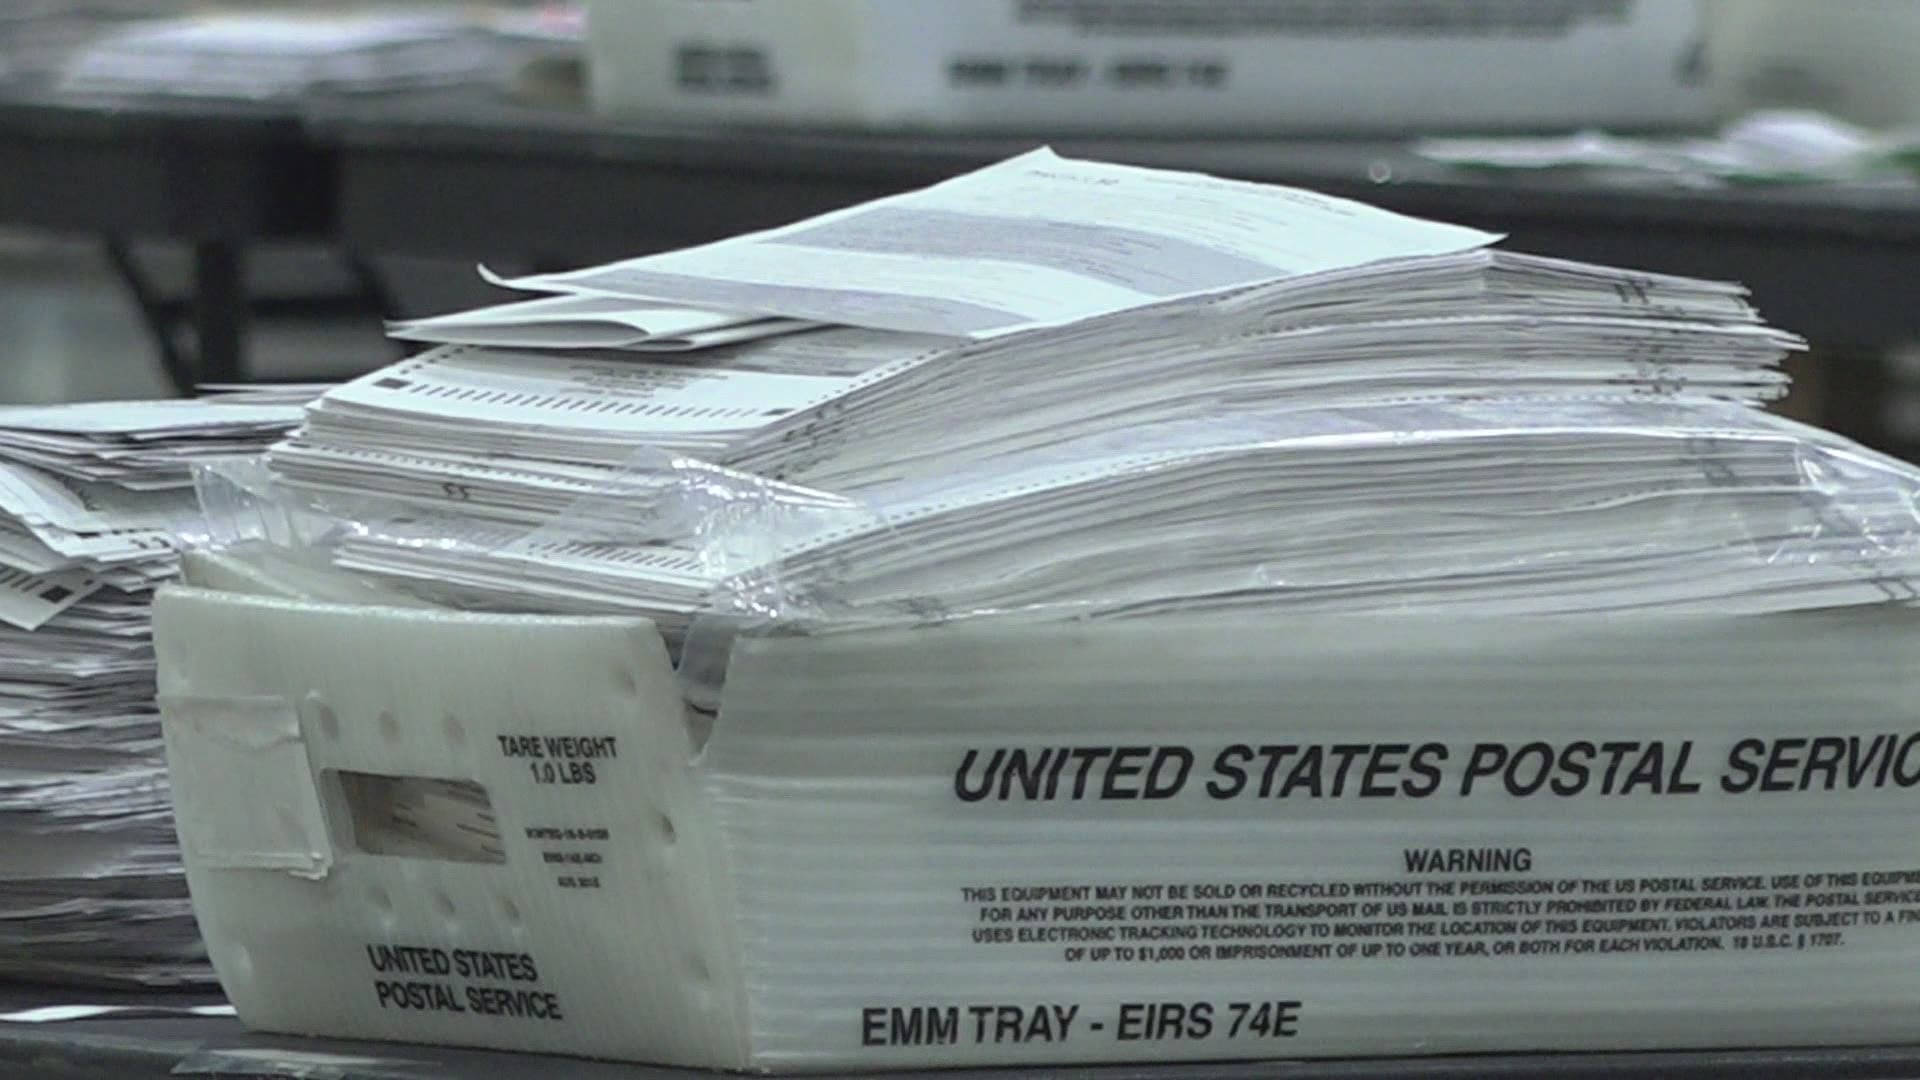 The city had over 59,000 absentee ballots returned.